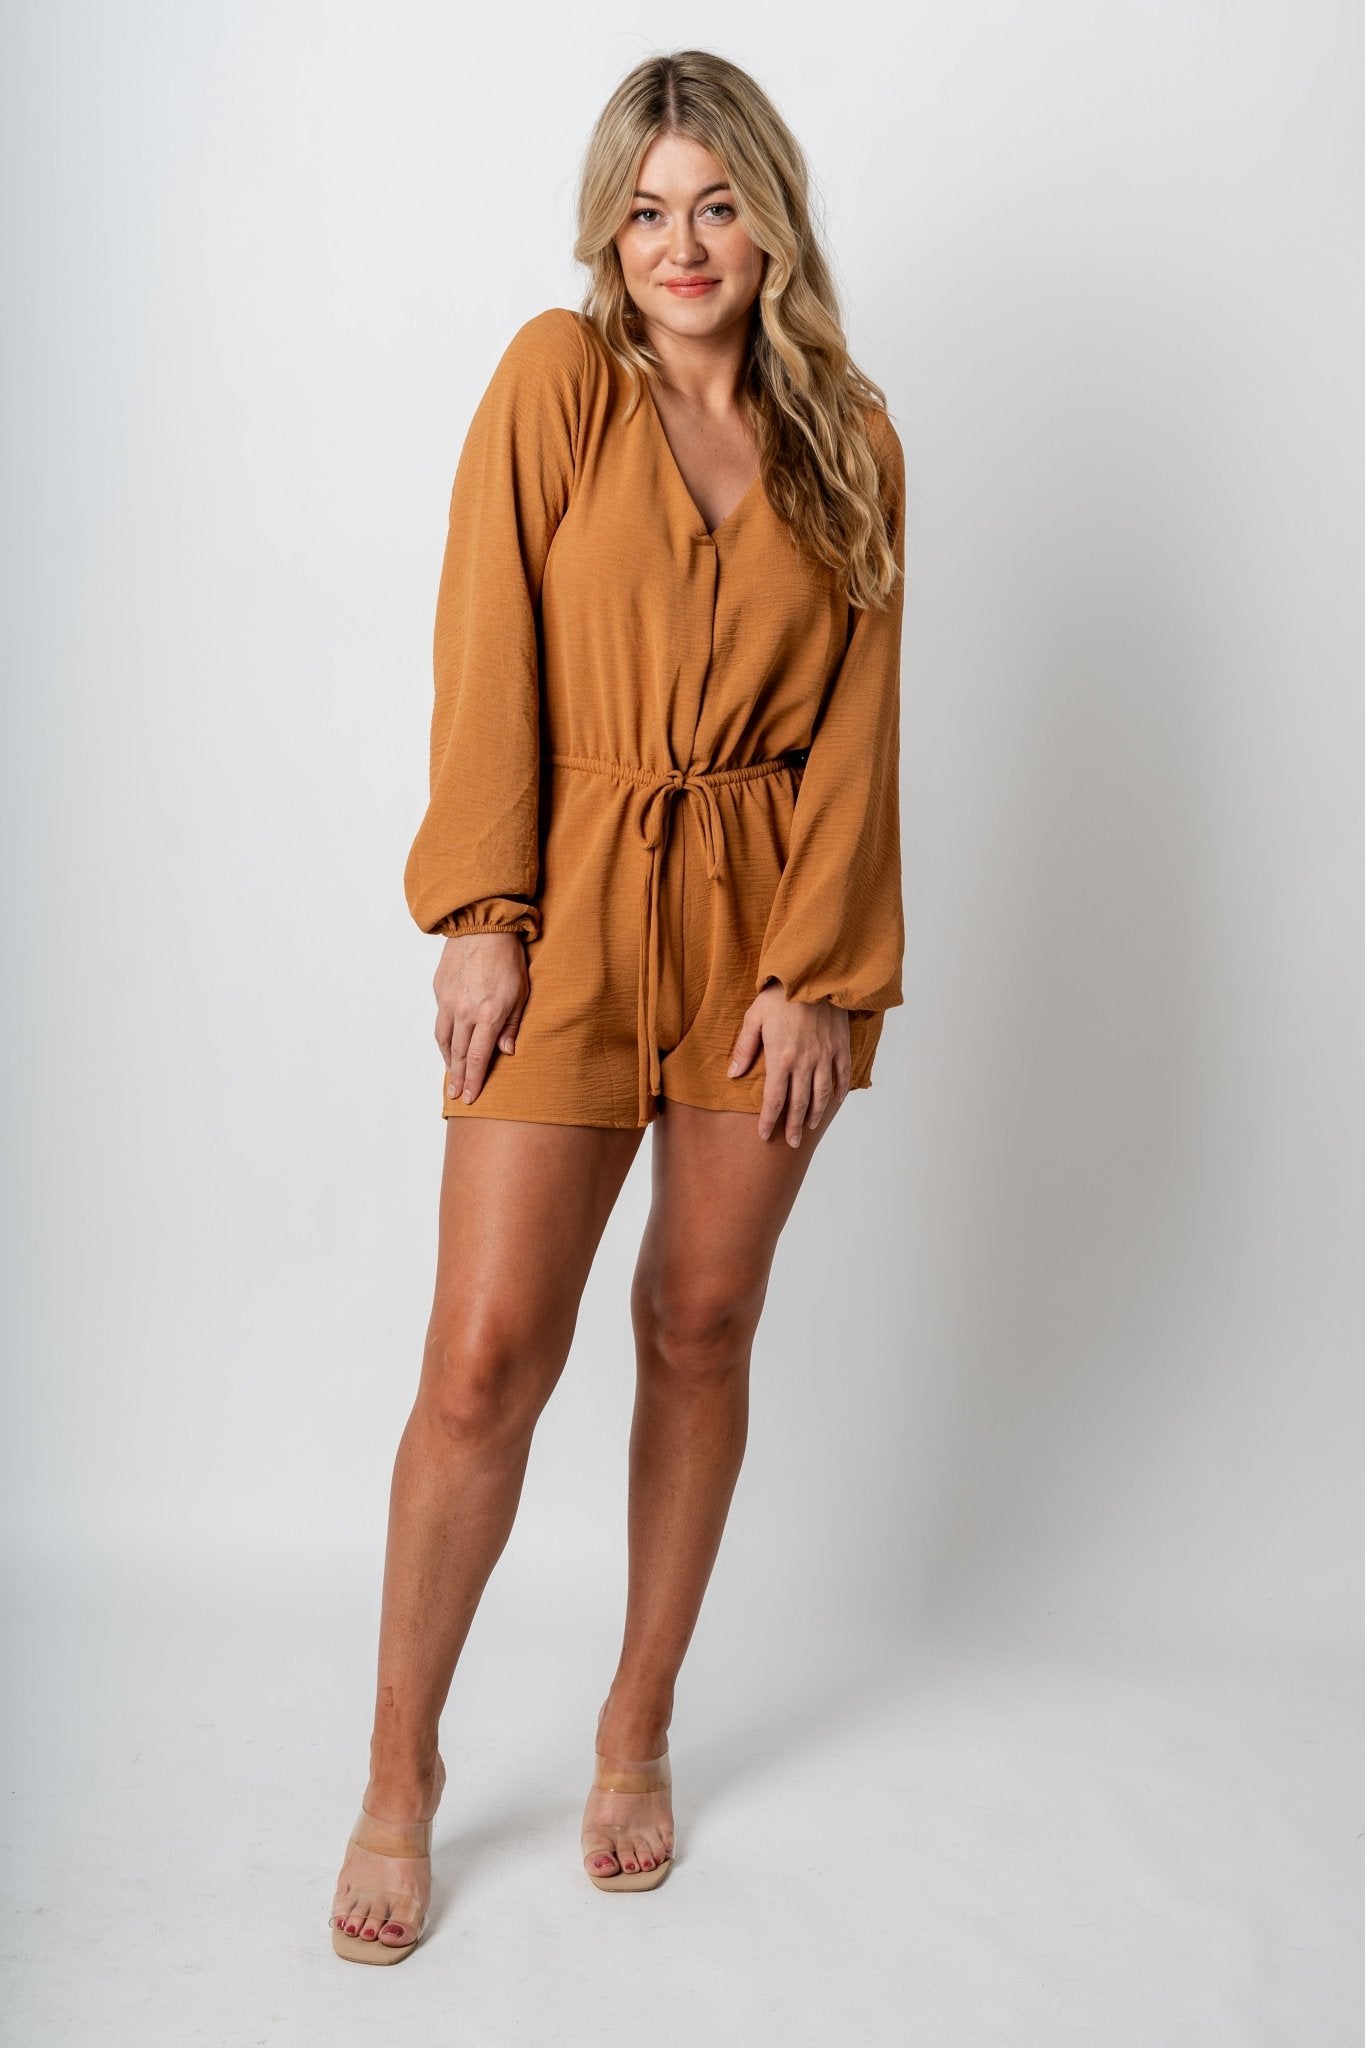 Tie waist long sleeve romper camel - Trendy Romper - Fashion Rompers & Pantsuits at Lush Fashion Lounge Boutique in Oklahoma City